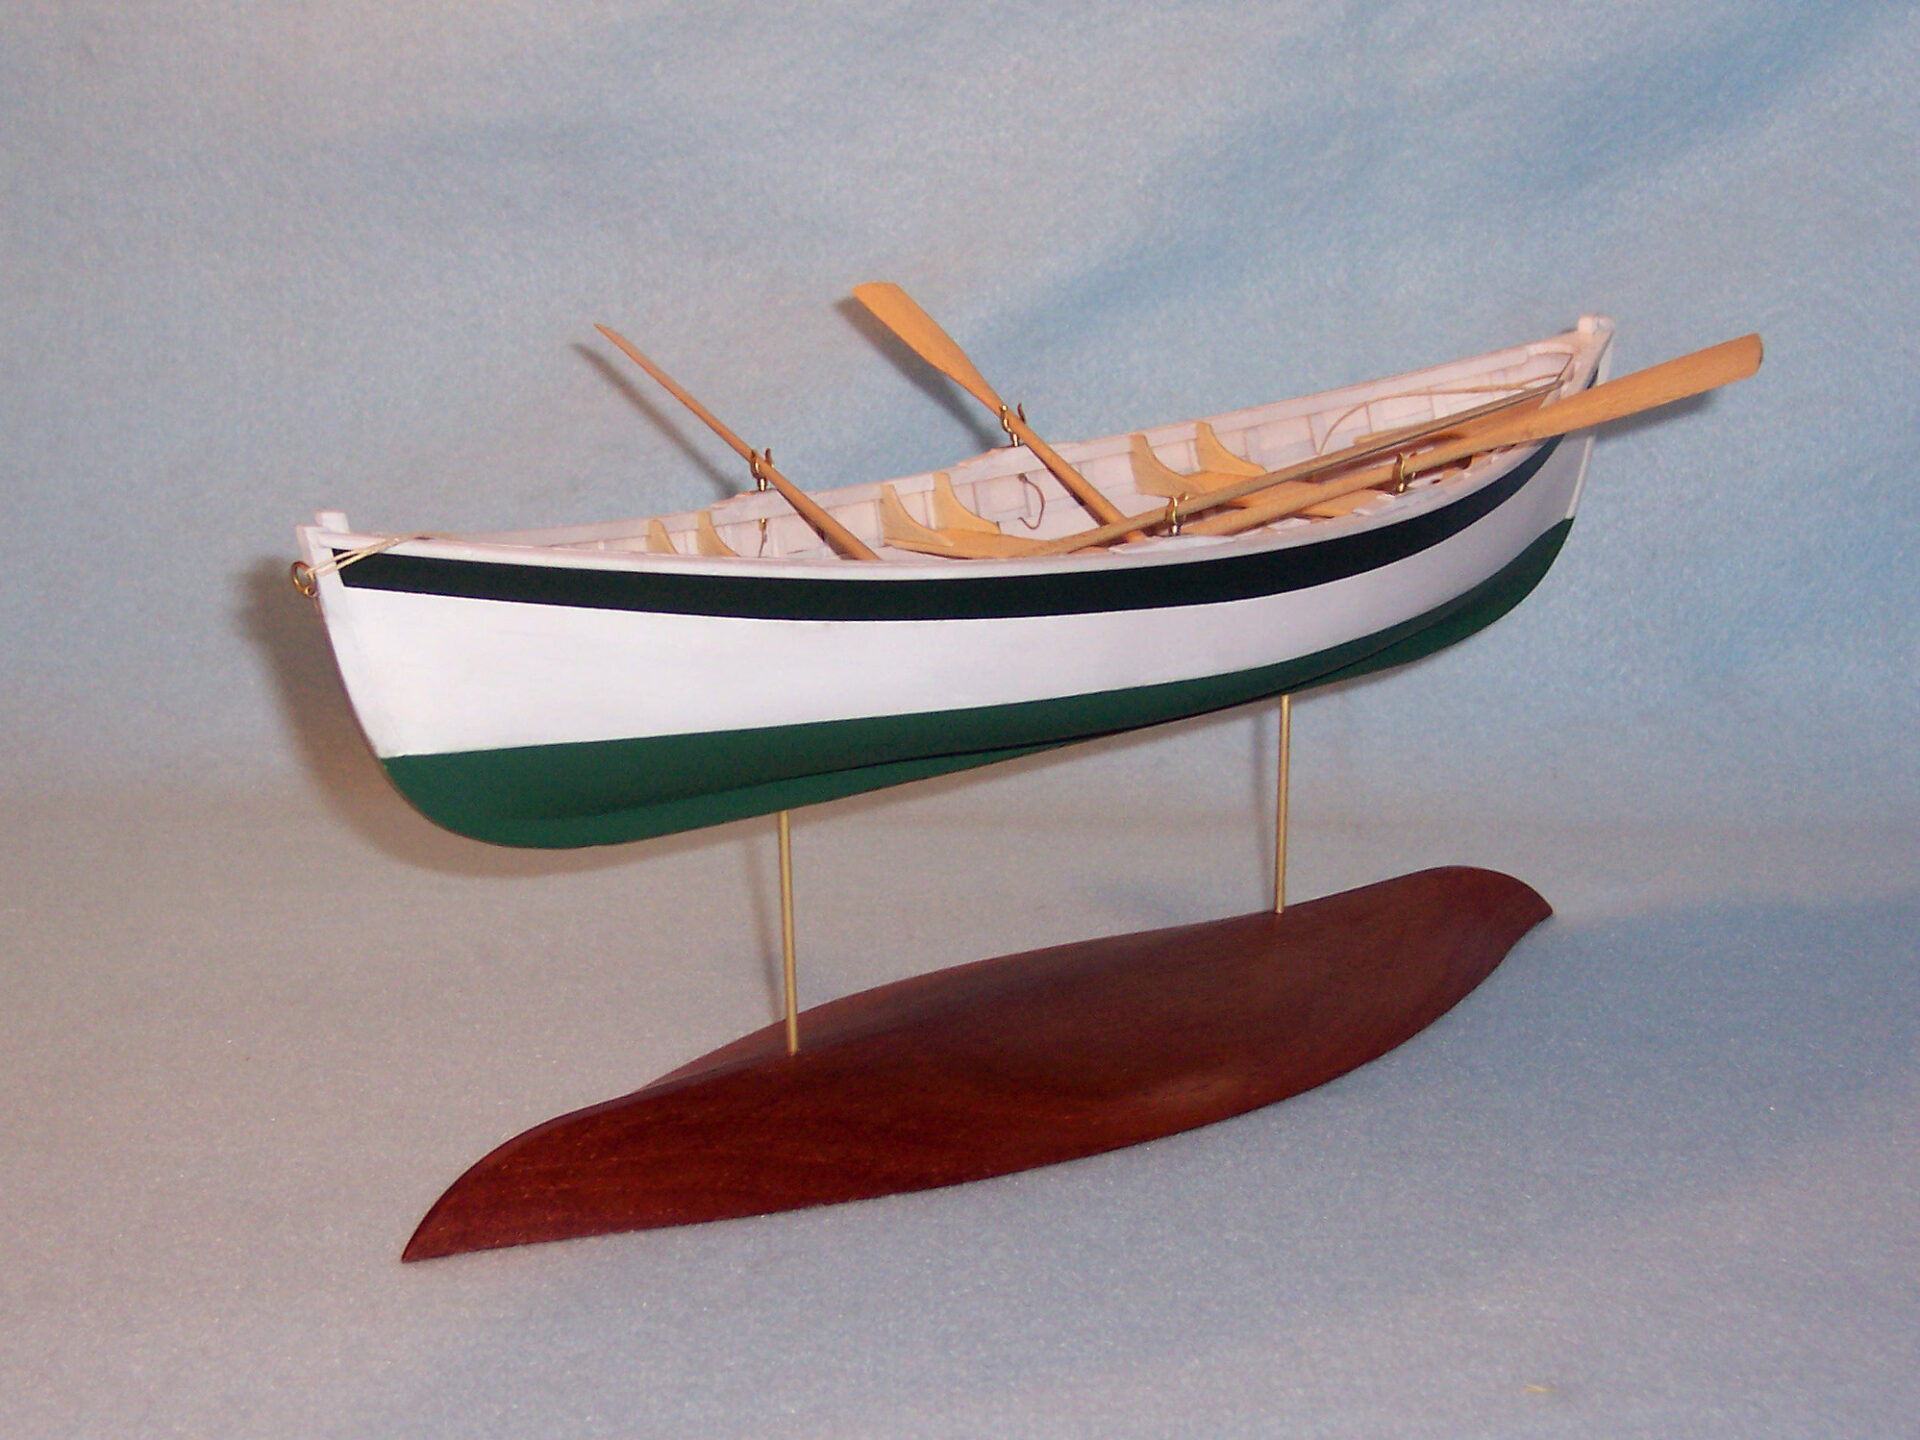 Model of a peapod rowing boat - Port side, painted